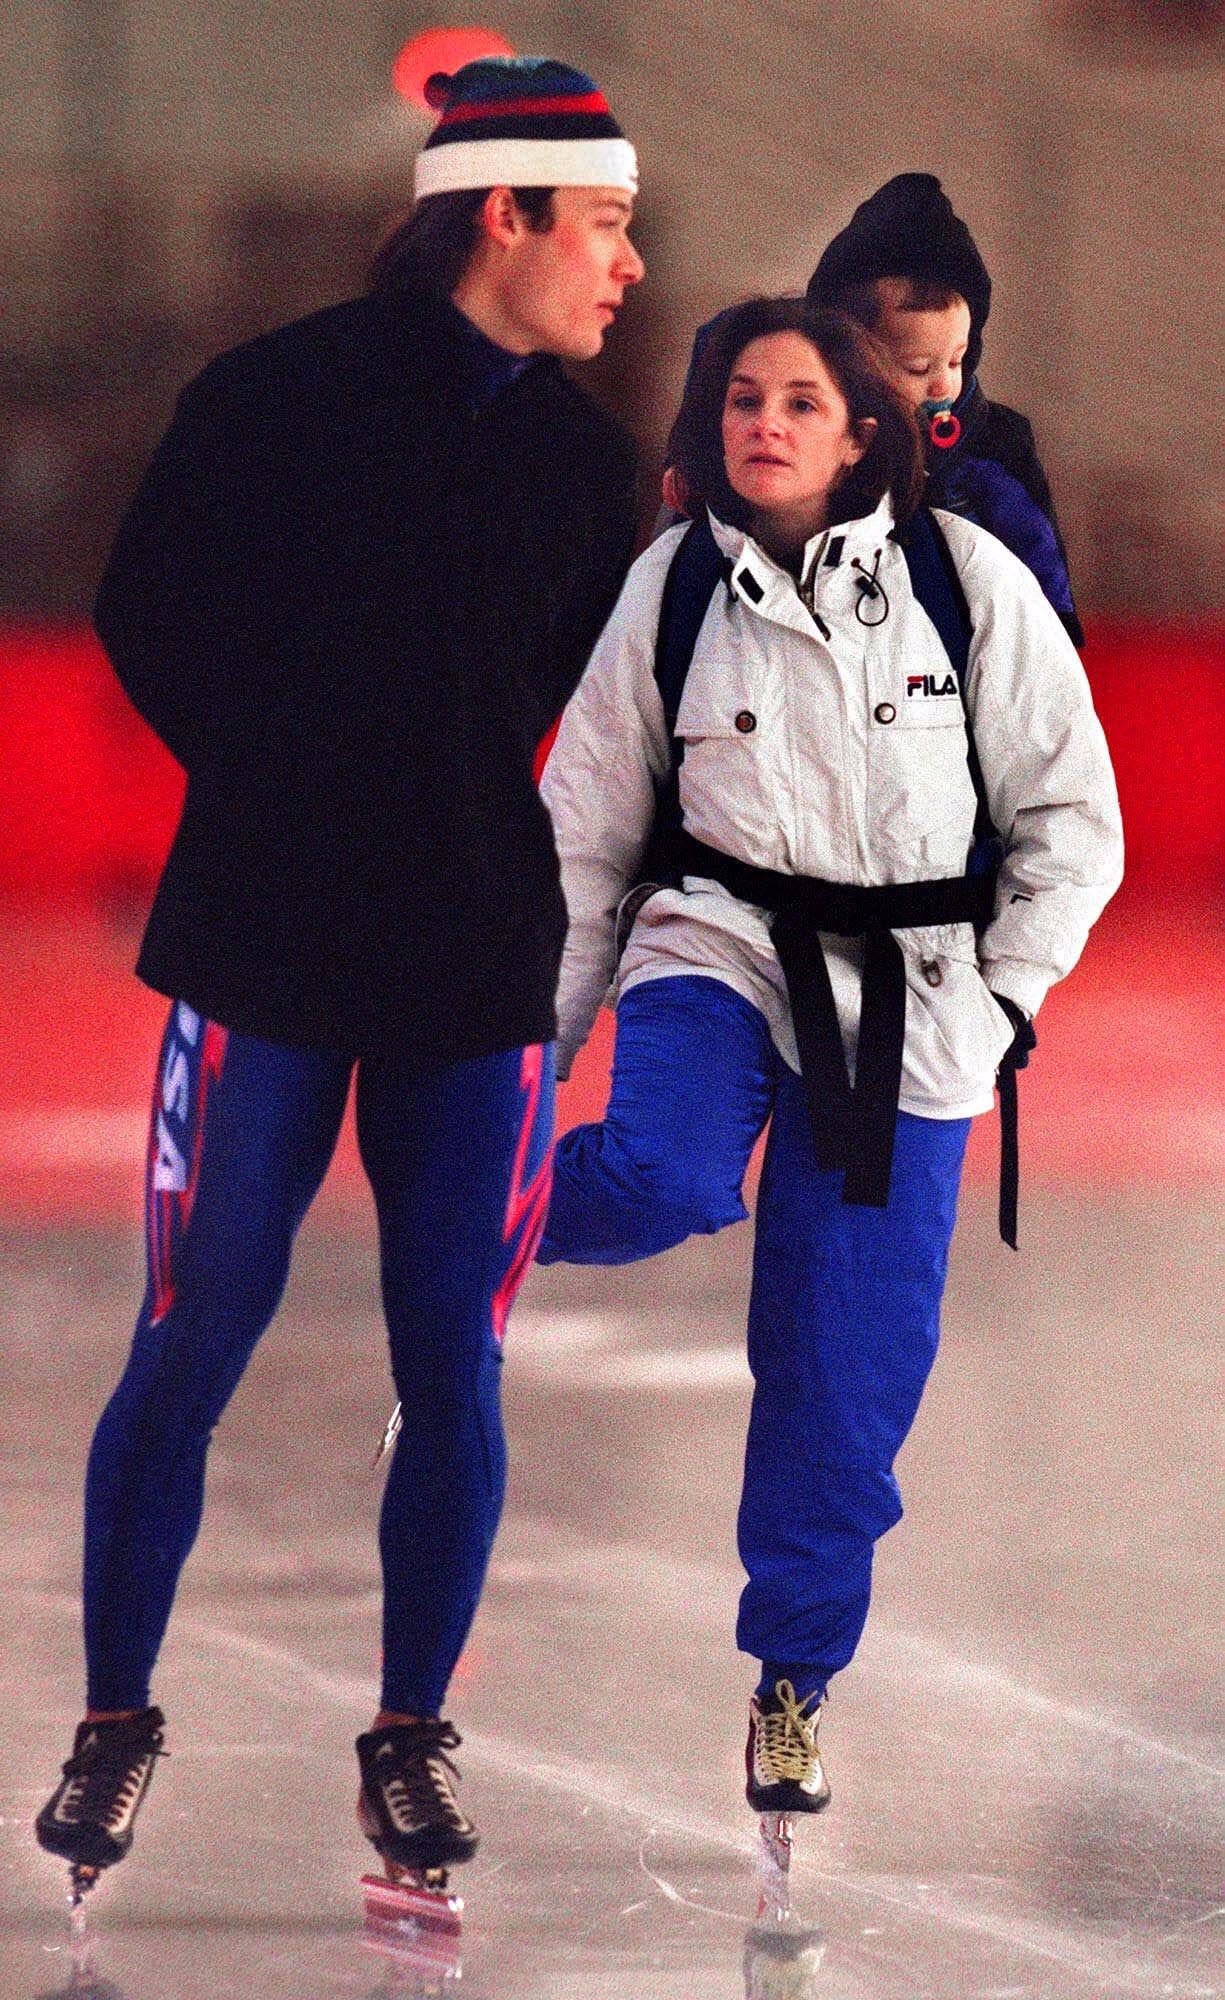 Five-time Olympic gold medalist Bonnie Blair skates with her husband, Dave Cruikshank and son, Grant B. Cruikshank, 1, at the Pettit National Ice Center on  Feb. 1, 2000. Cruikshank was practicing for the World Speed Skating Championships.